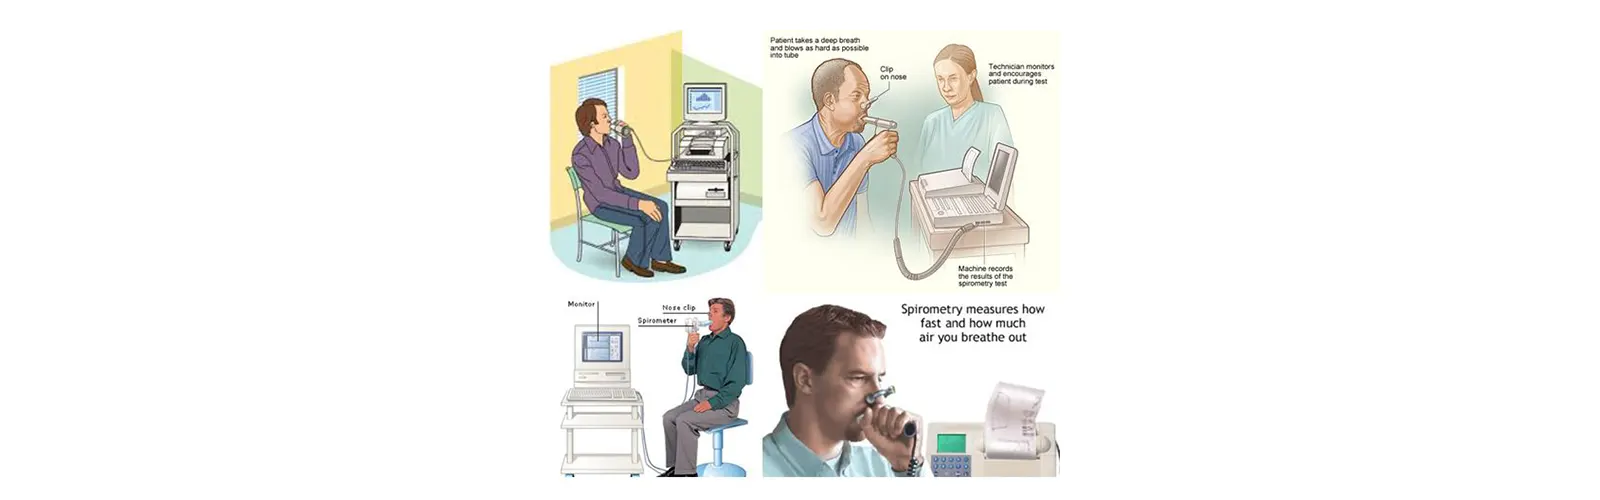 What Are The Parts Of The (PFT) Pulmonary Function Test?